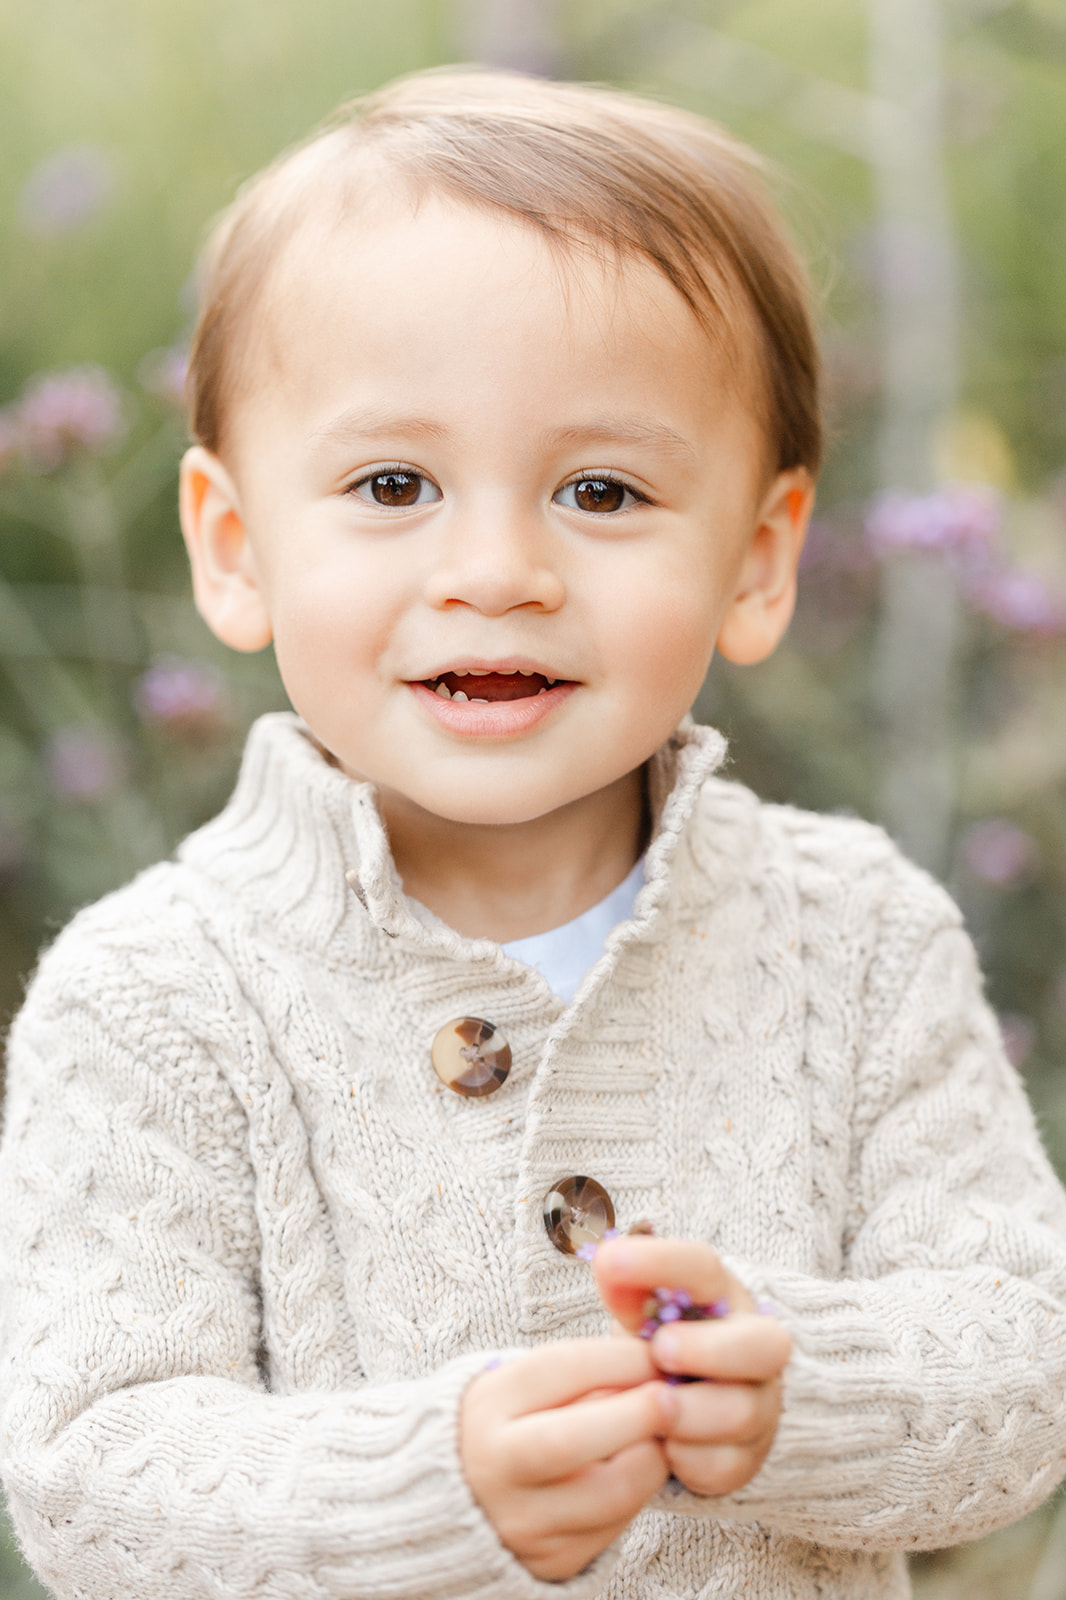 A happy toddler boy explores a garden in a cream knit sweater before visiting an indoor playgrounds in Portland